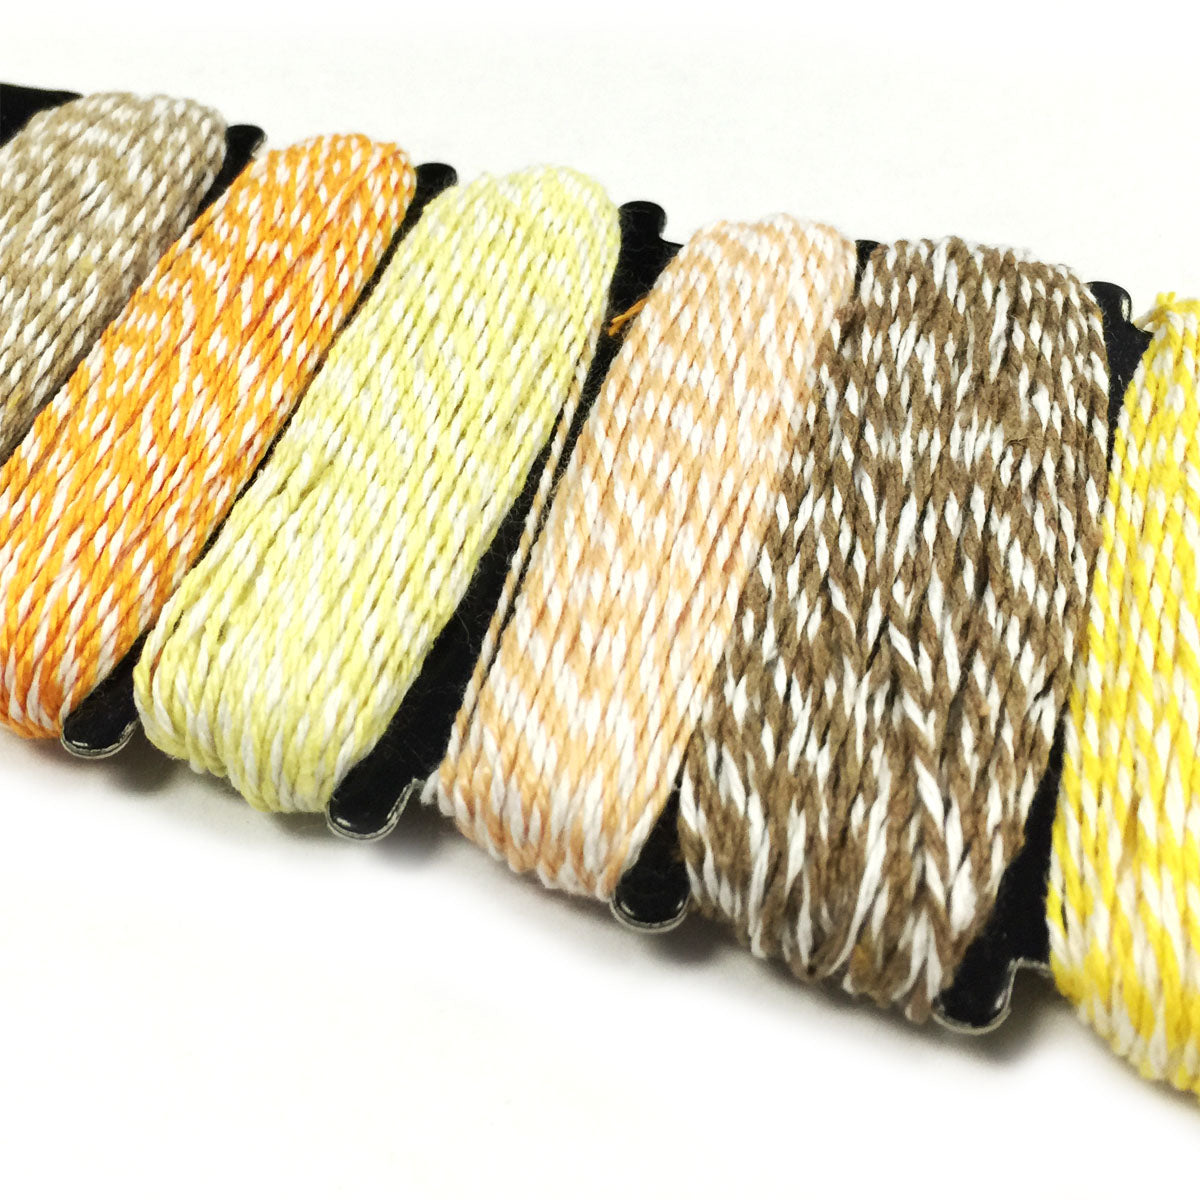 Wrapables Cotton Baker's Twine 4ply 60 Yards (Set of 6 Colors x 10 Yards)